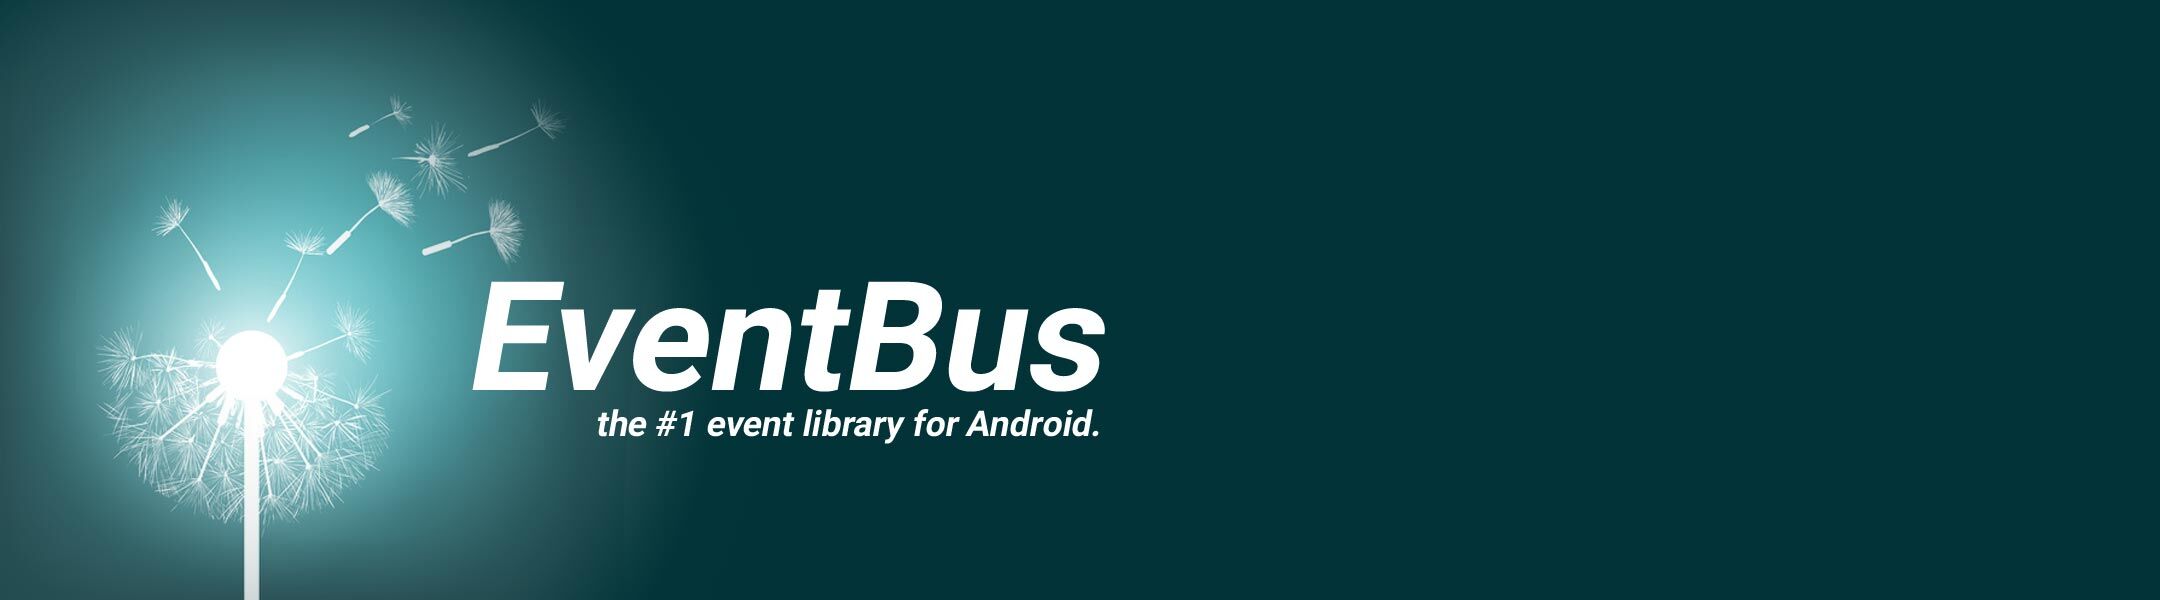 Events for Android - EventBus